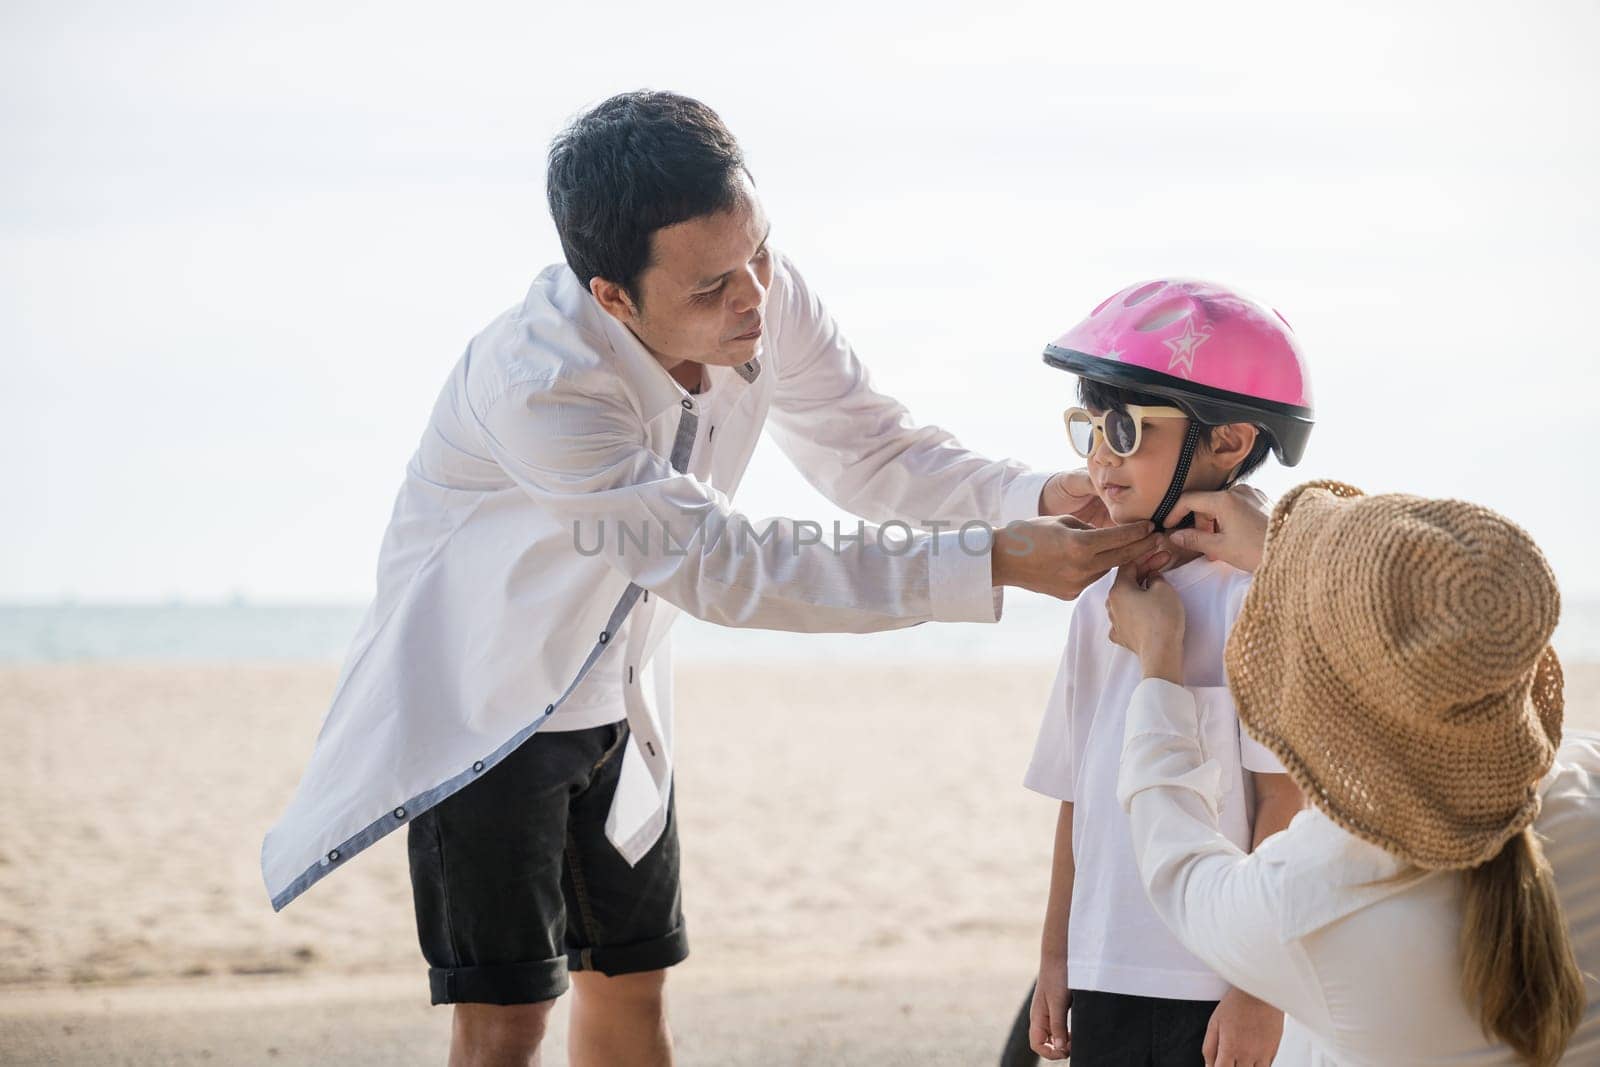 Bike riding lessons by the sea, A father in a safety helmet imparts the art of cycling to his cheerful son a beautiful family moment on their beach vacation filled with inspiration and happiness. by Sorapop